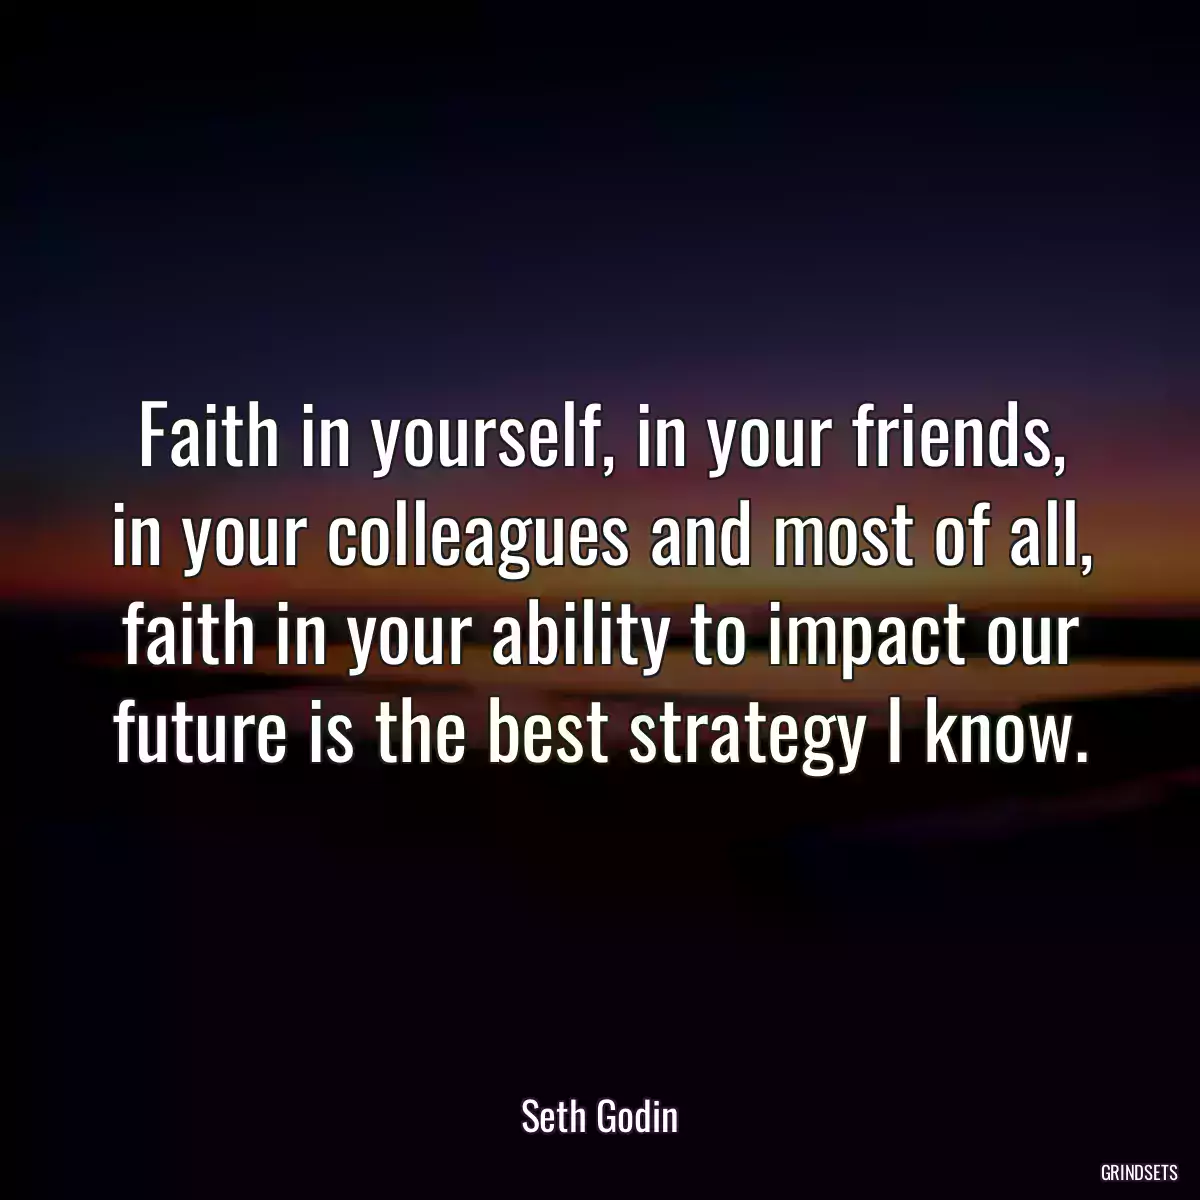 Faith in yourself, in your friends, in your colleagues and most of all, faith in your ability to impact our future is the best strategy I know.